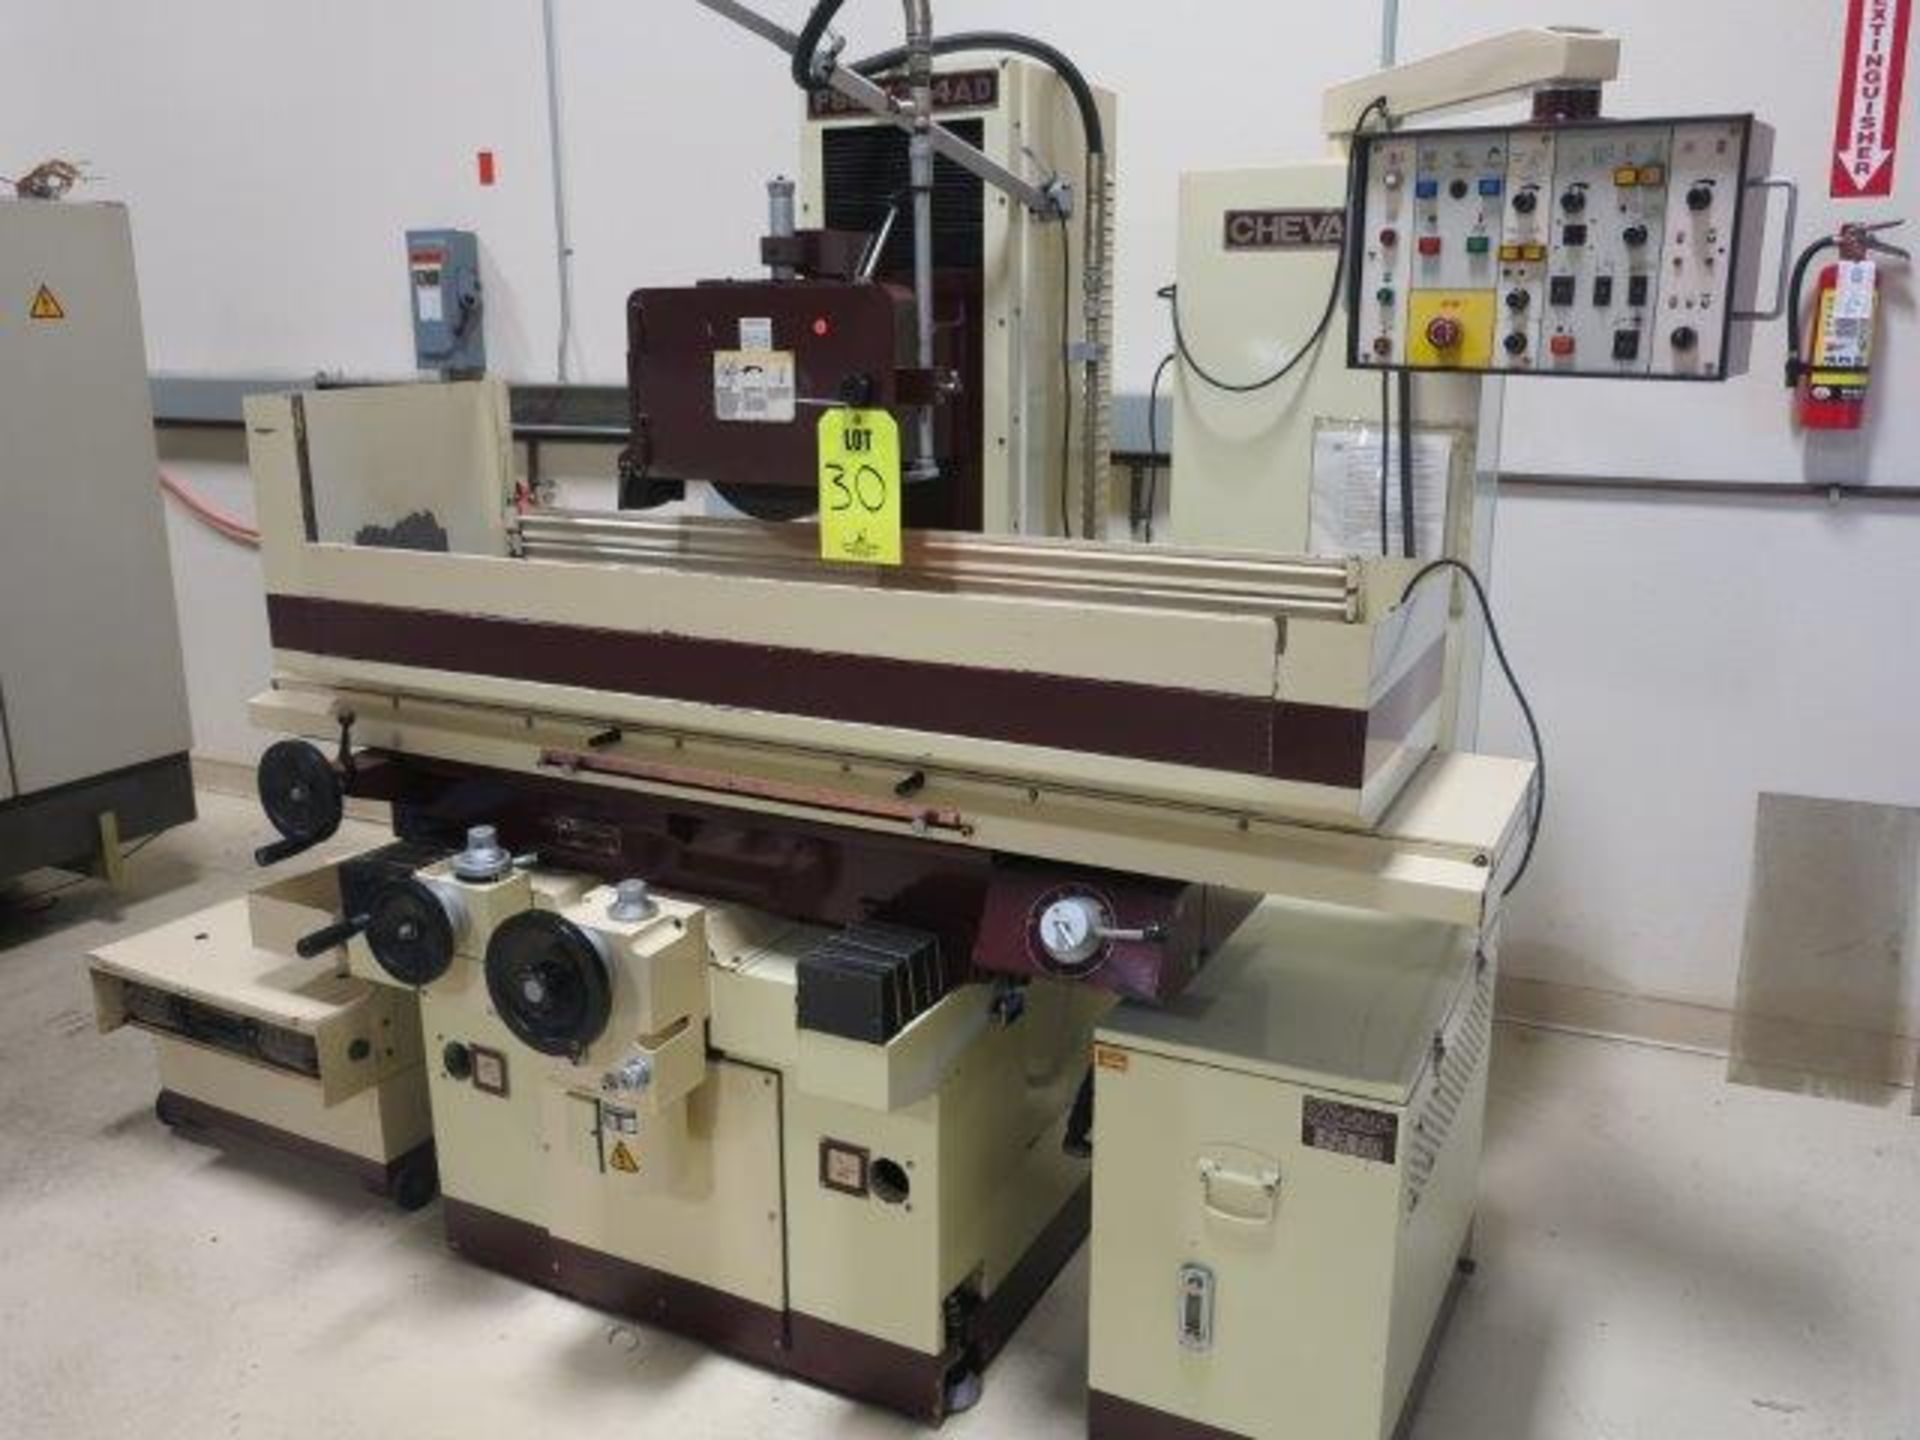 CHEVALIER FSG-1224AD SURFACE GRINDER, 12” X 24” MAG CHUCK, AUTOMATIC DOWN FEED, S/N F1841B3003 - Image 3 of 7